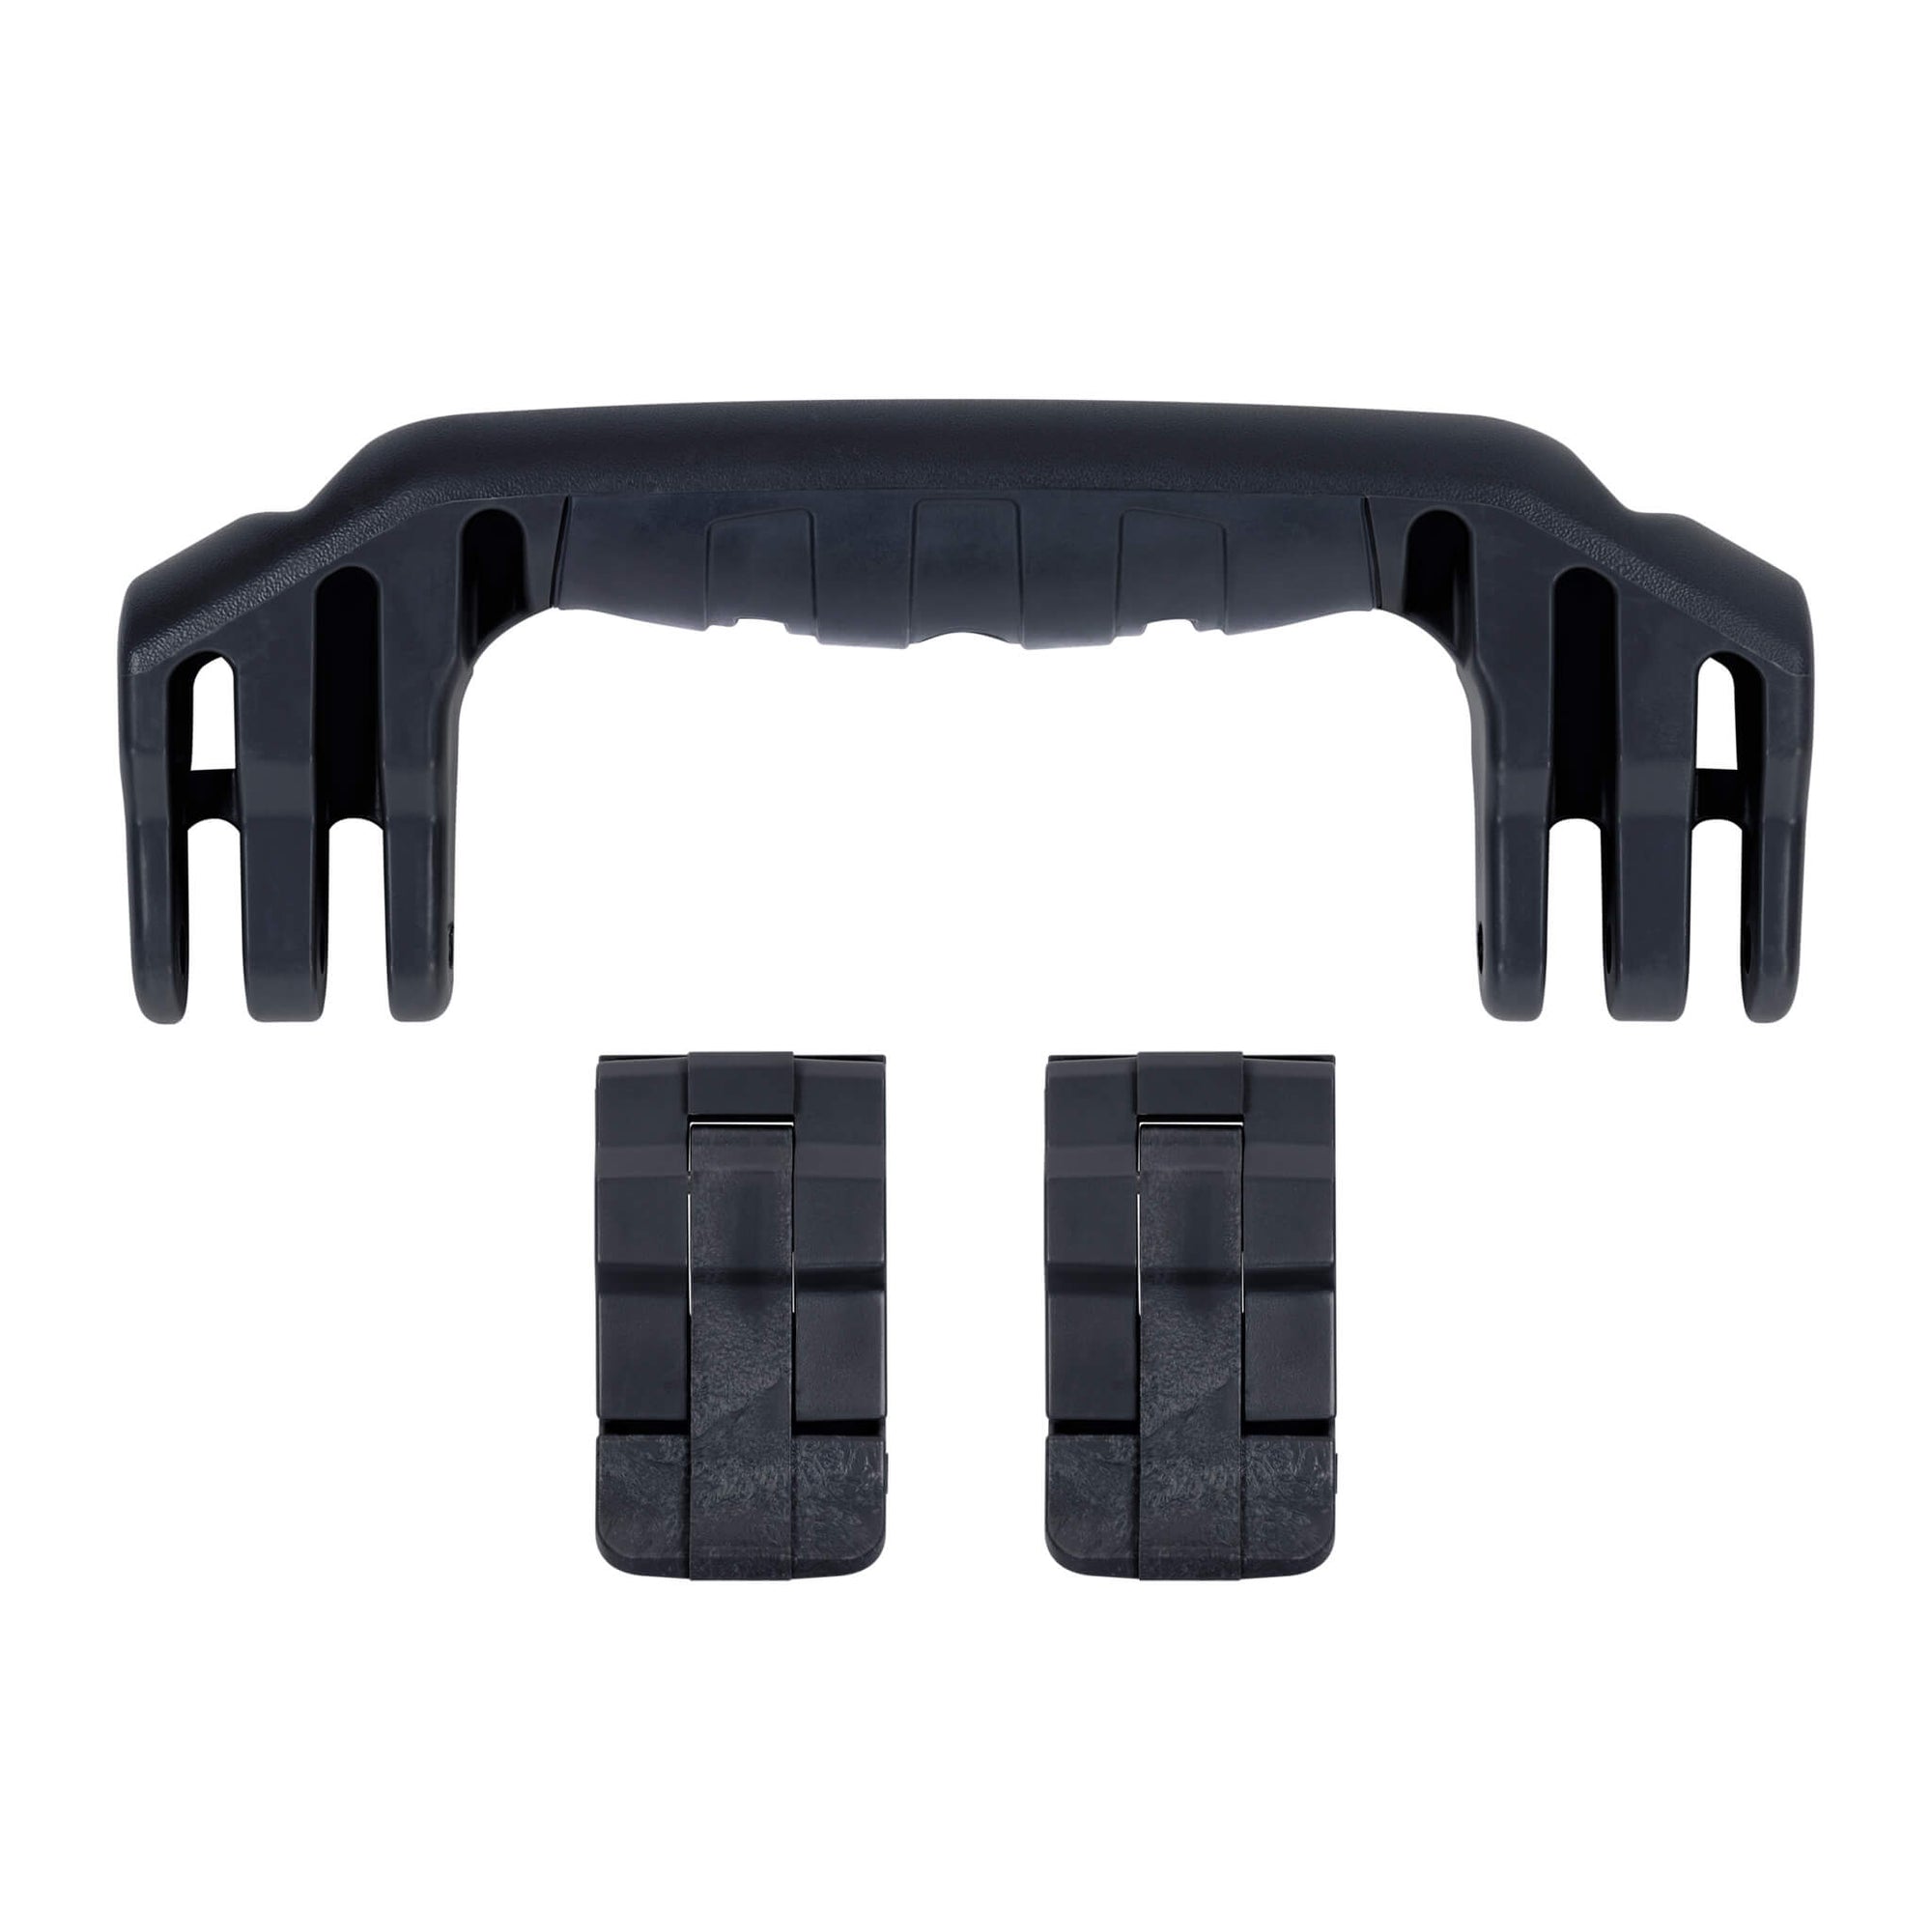 Pelican 1450 Replacement Handle & Latches, Black (Set of 1 Handle, 2 Latches) ColorCase 